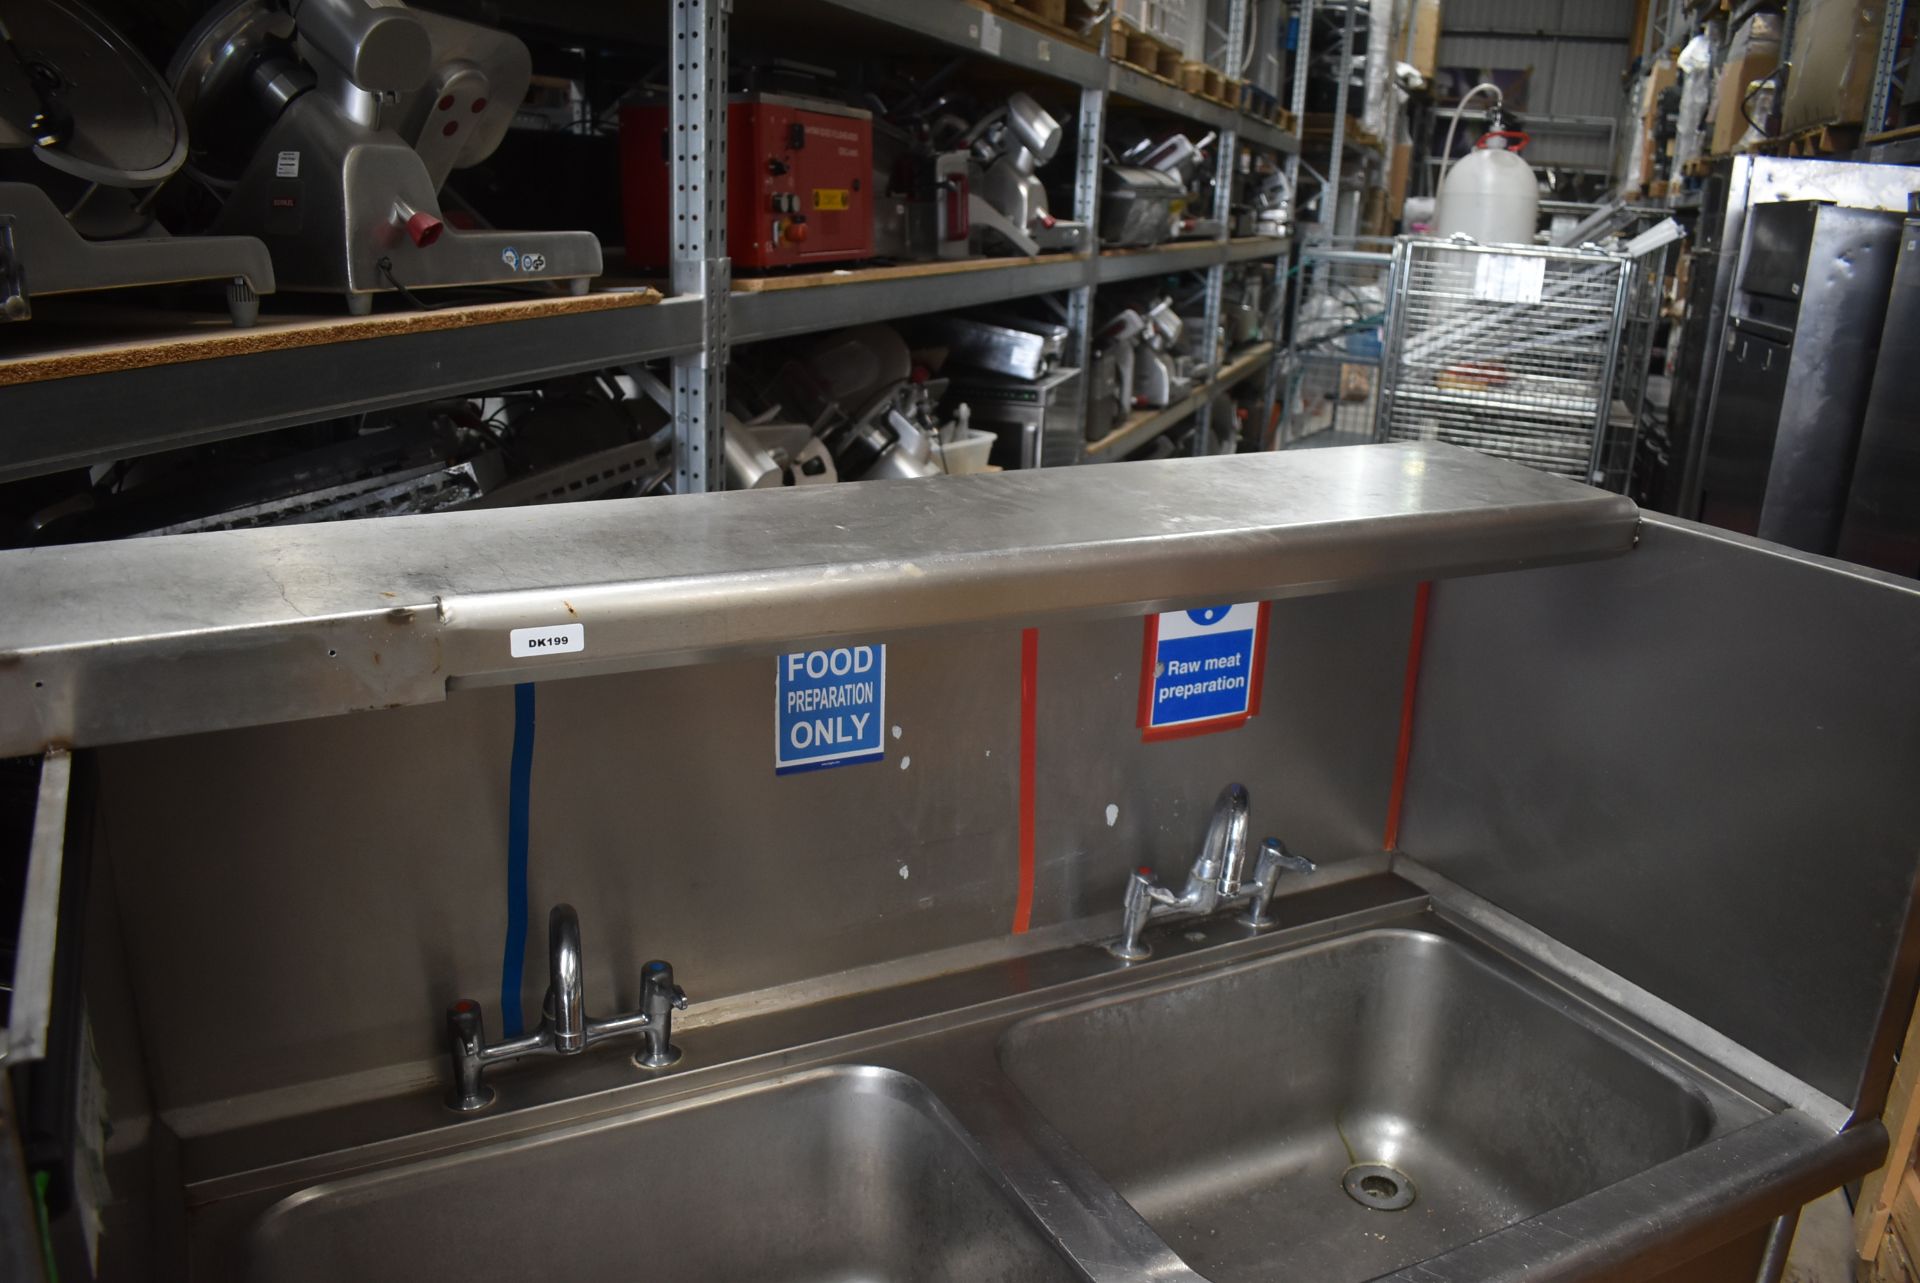 1 x Stainless Steel Twin Sink Wash Unit With Mixer Taps and Splash Back Surround - Width: 125 cms - Image 4 of 11